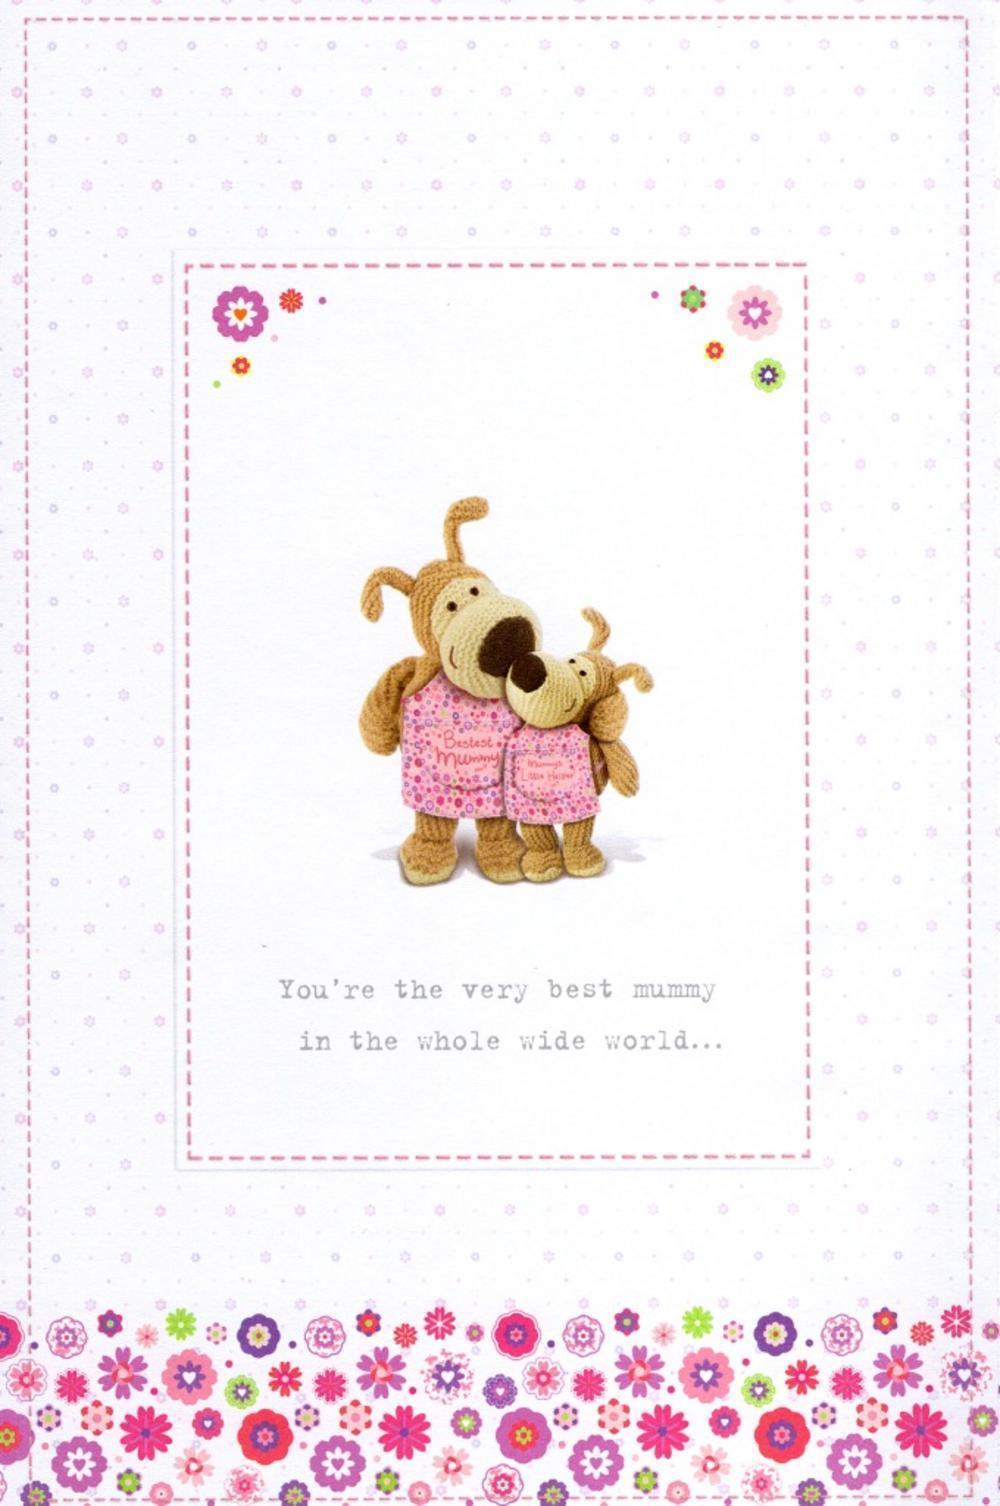 Mummy From Your Daughter Sweet Boofle With Baby Boofle Apron Mother's Day Card